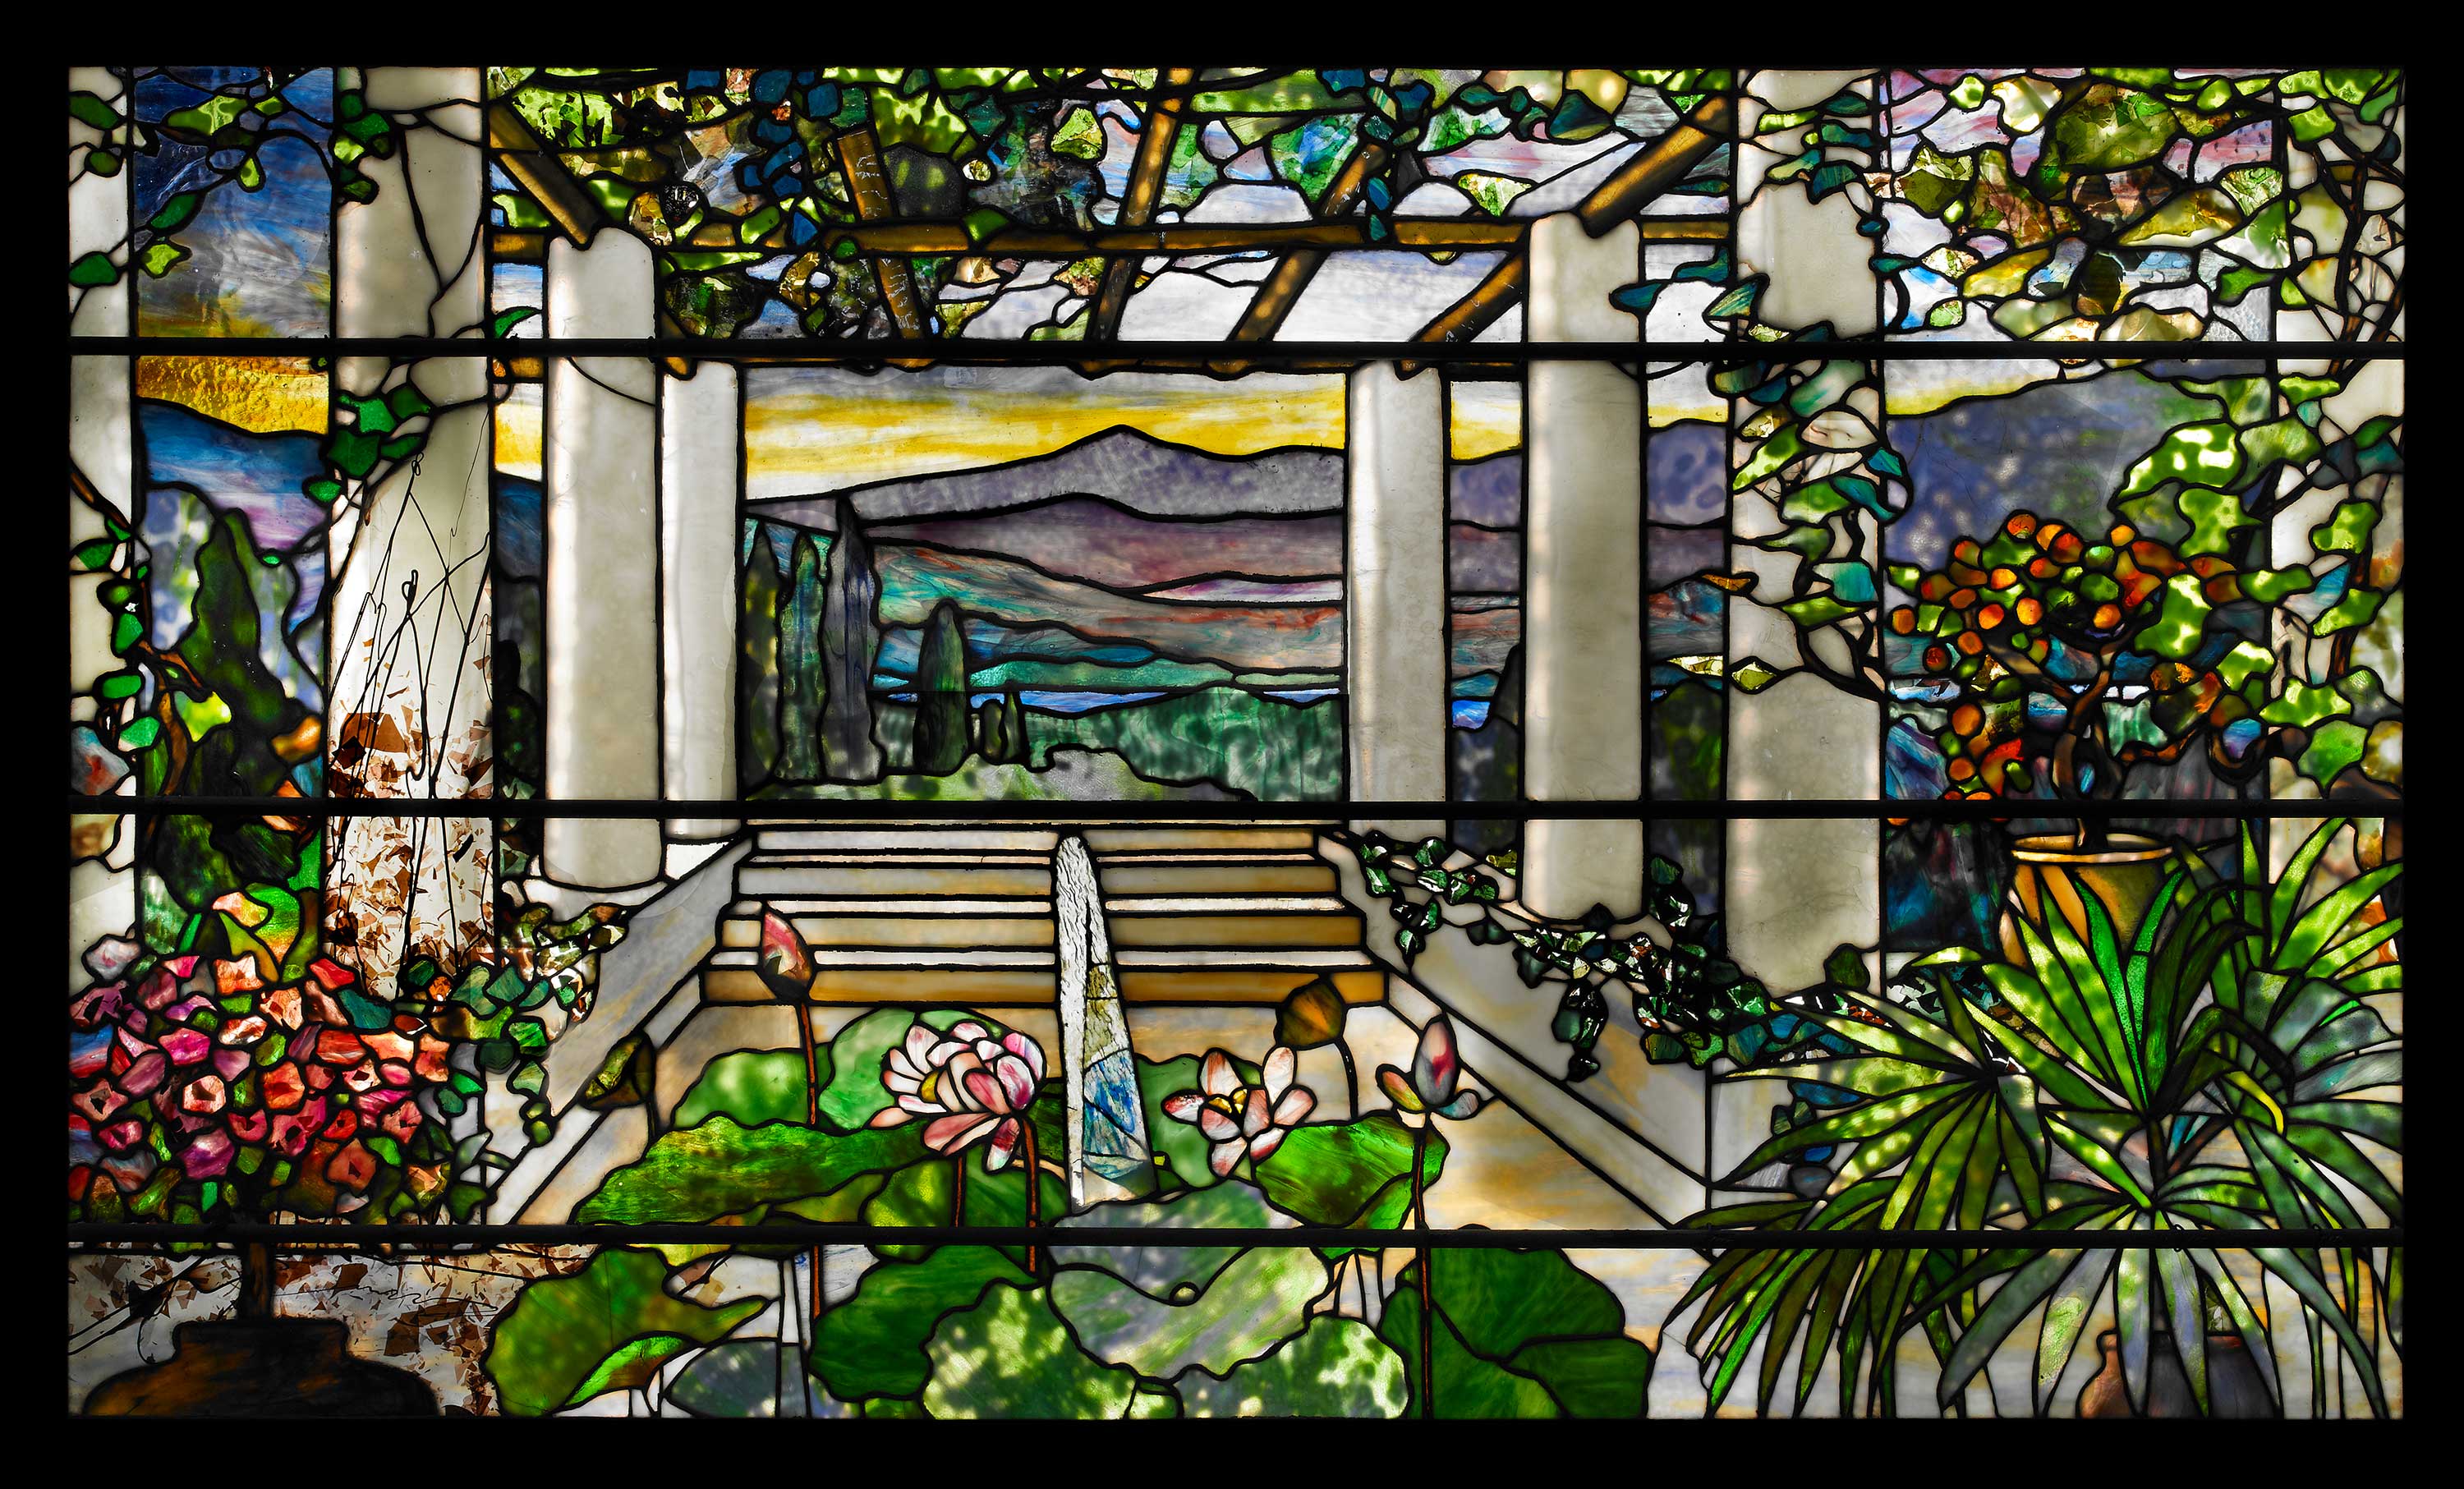 Timeless Beauty: The Art of Louis Comfort Tiffany